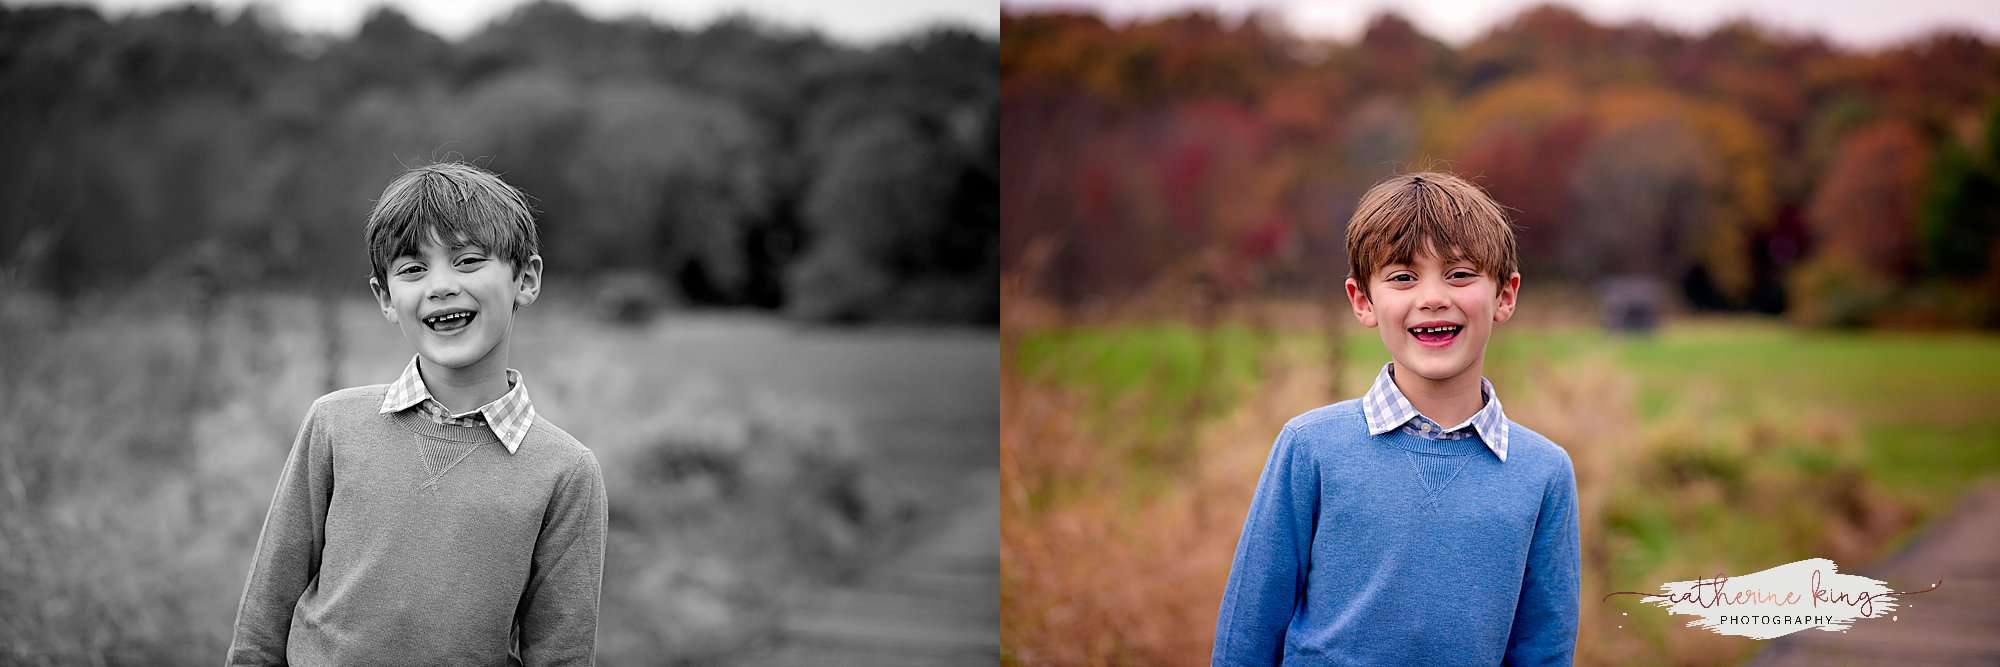 6 questions to ask your photographer and a family photography session in ct during fall foliage